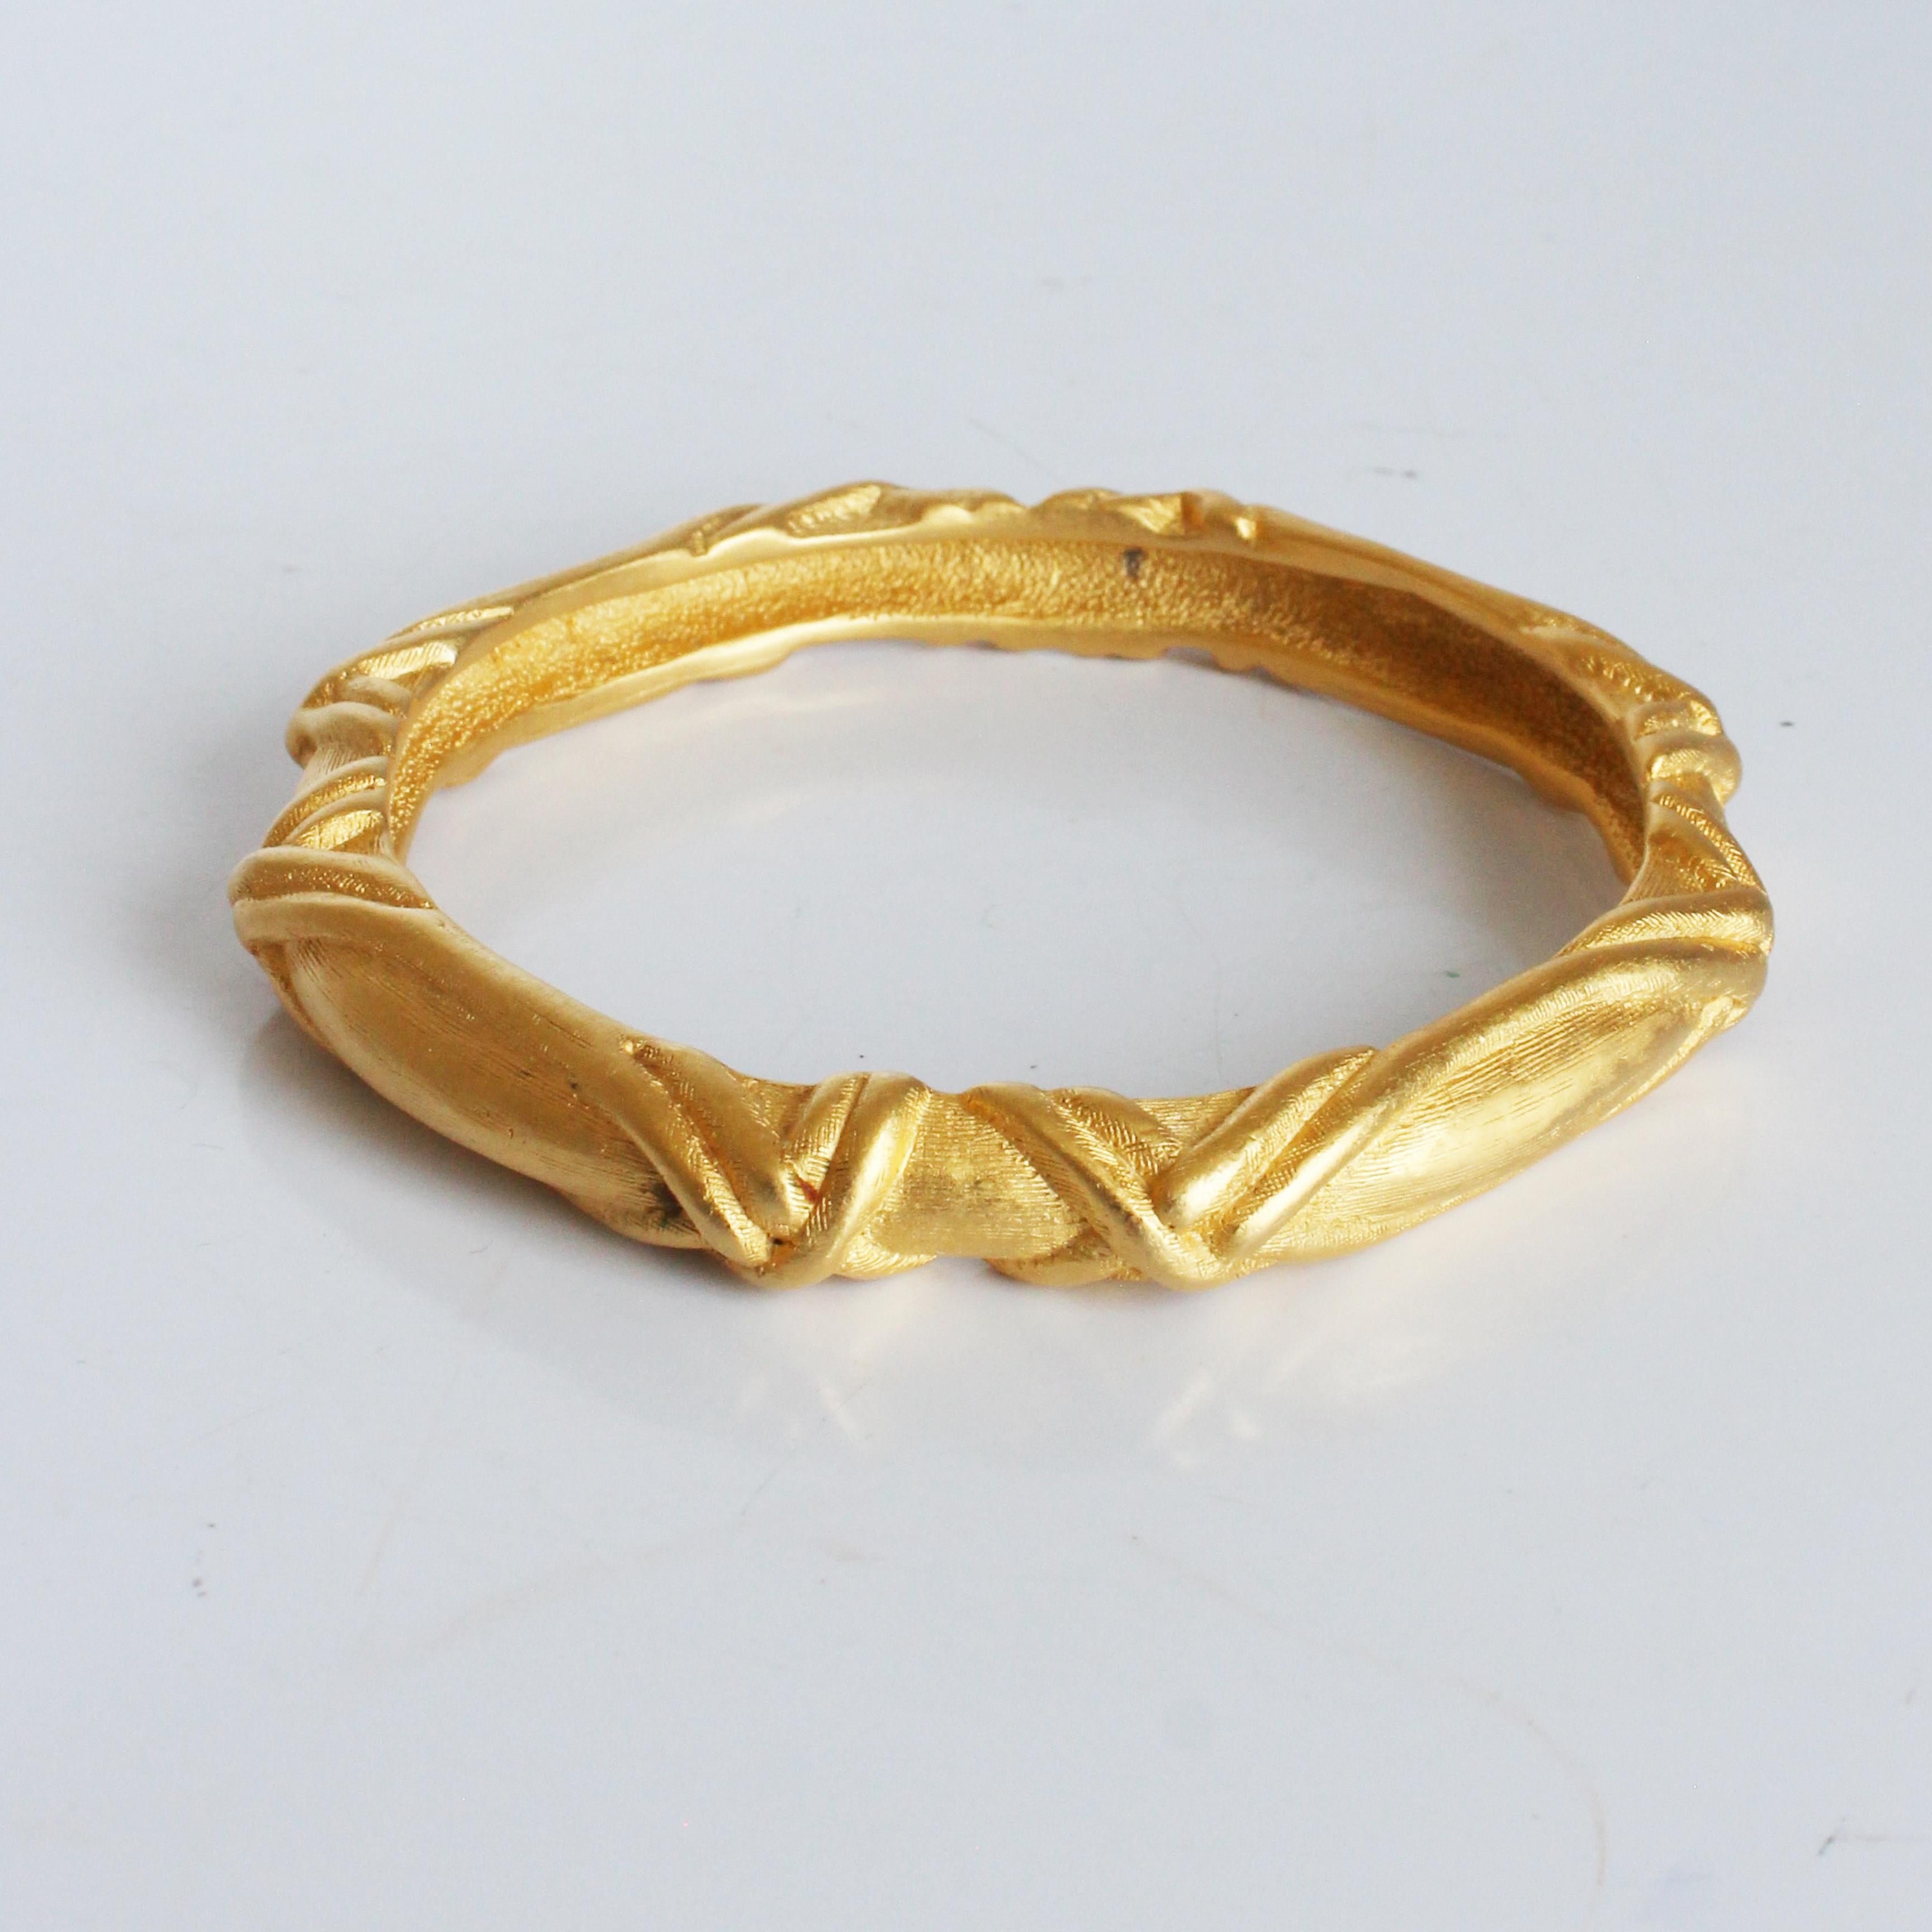 Givenchy Bracelet Bangle Gold Metal Textured Abstract Vintage 80s Jewelry  For Sale 3